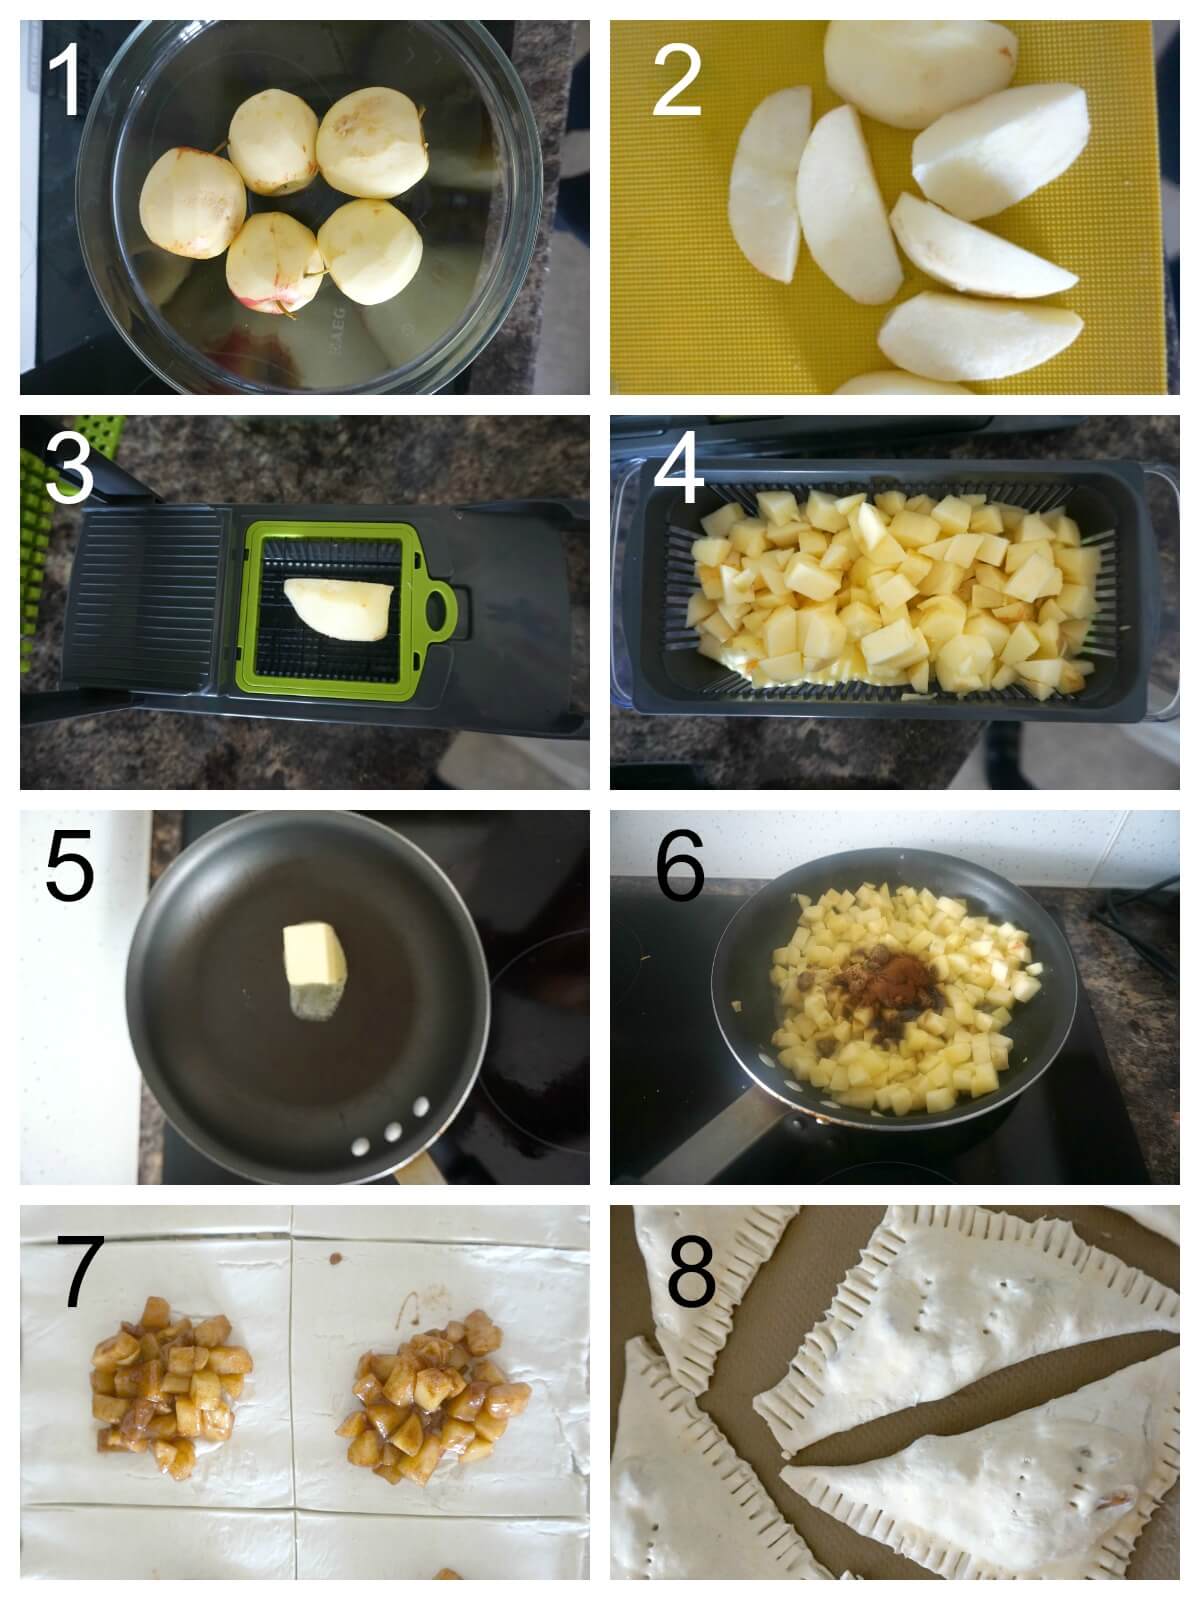 Collage of 8 photos to show how to make apple turnovers.